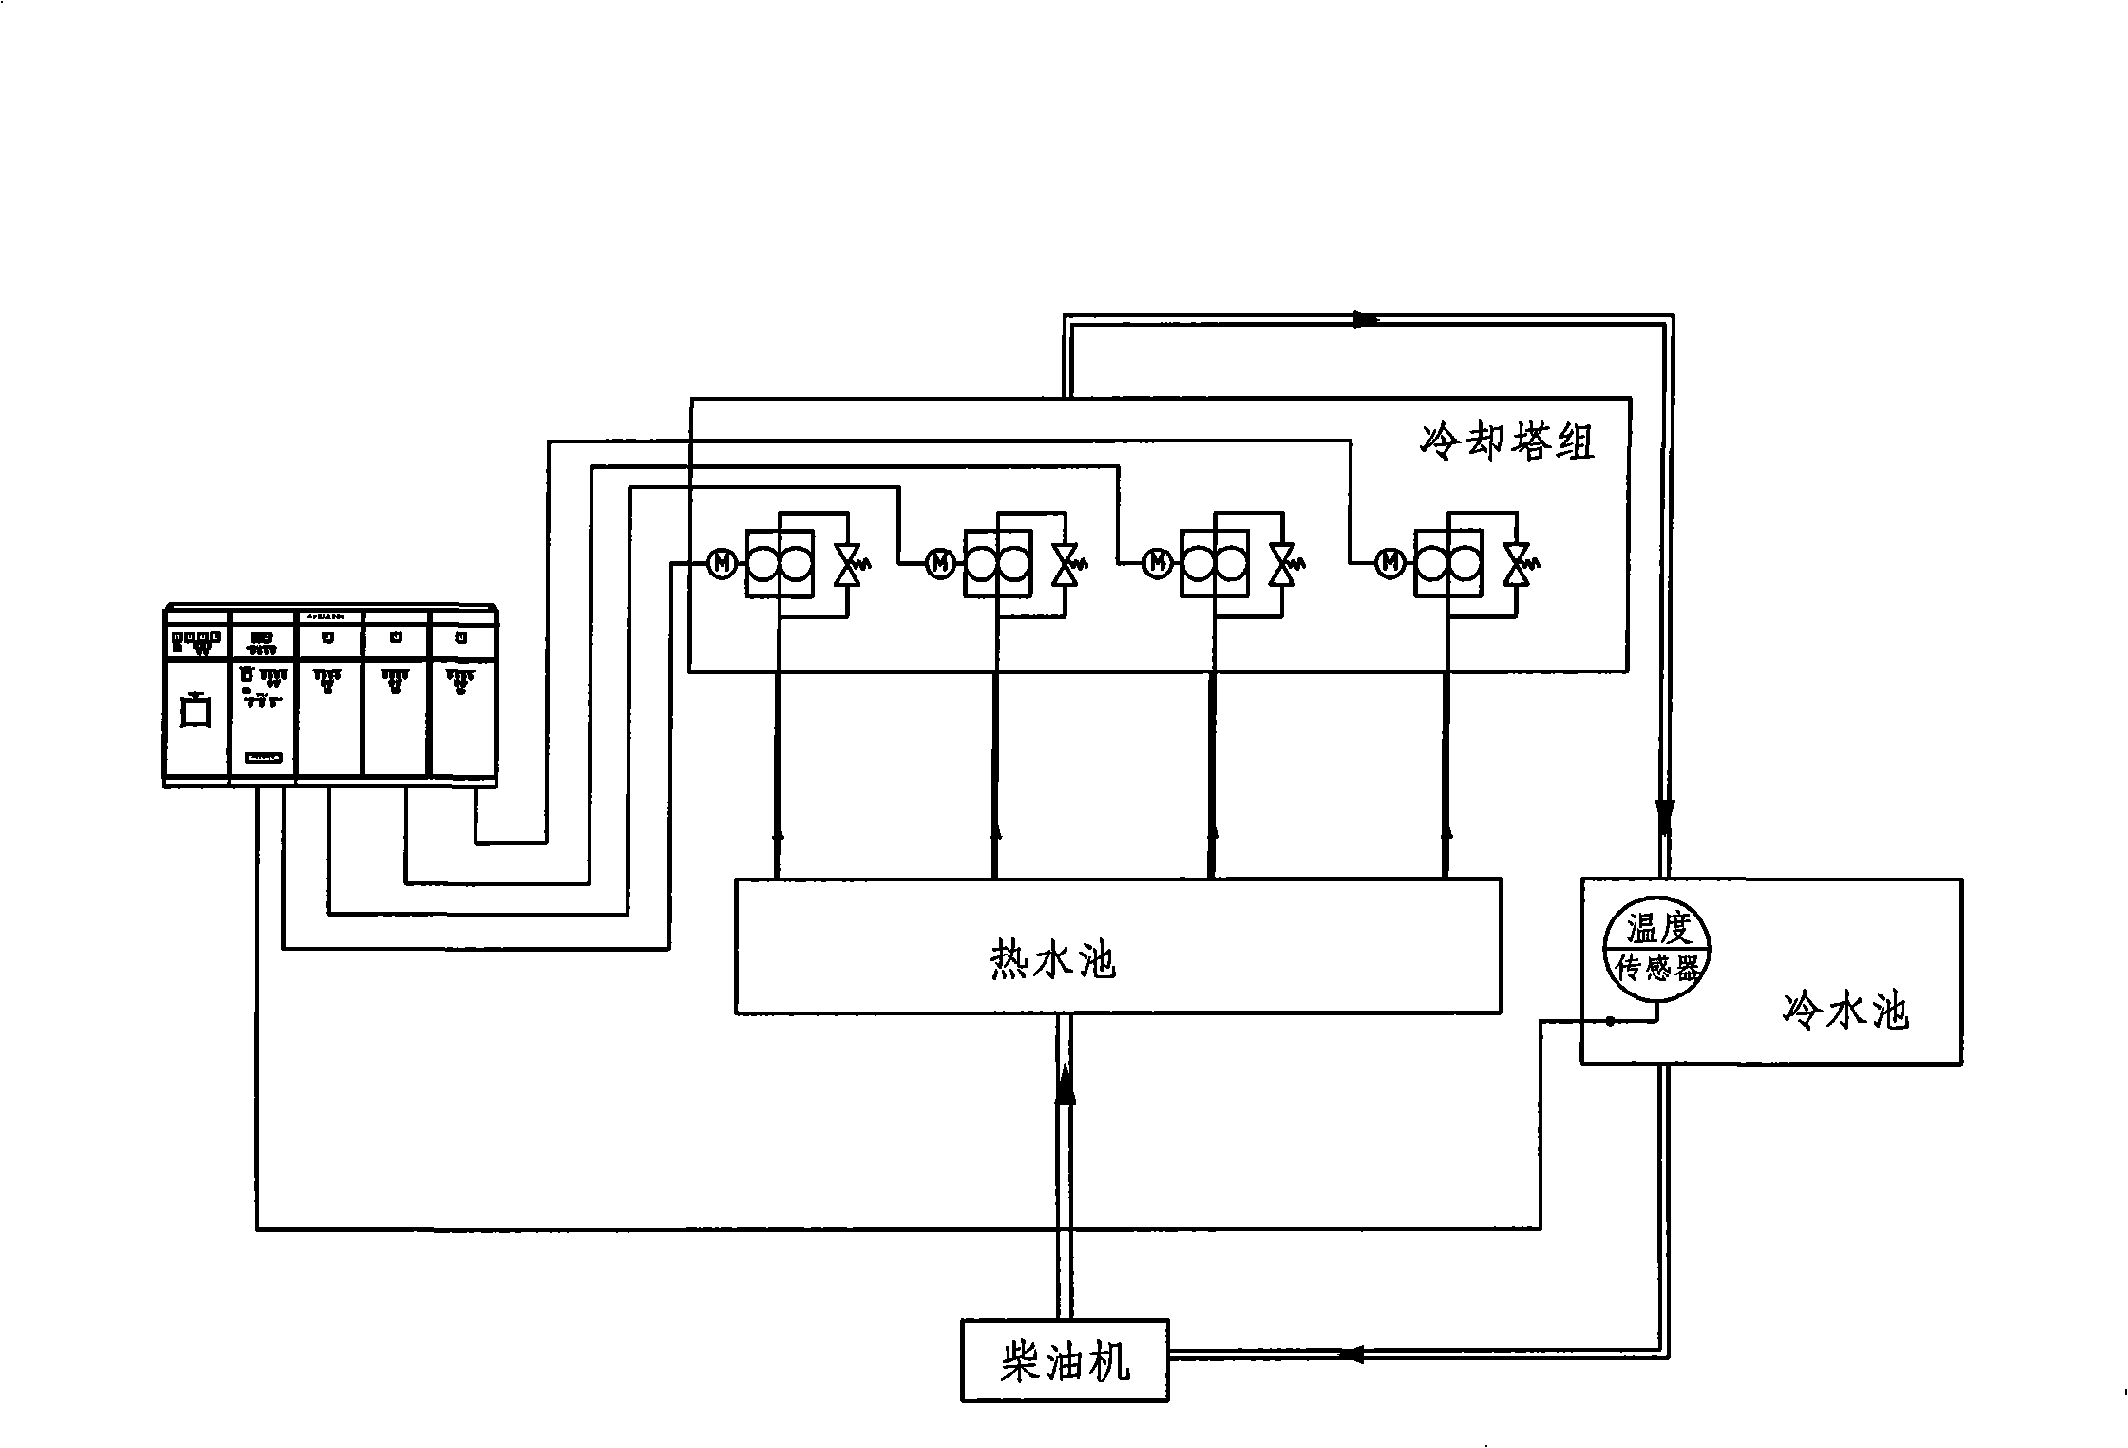 Automatic temperature control apparatus of large cooling column group